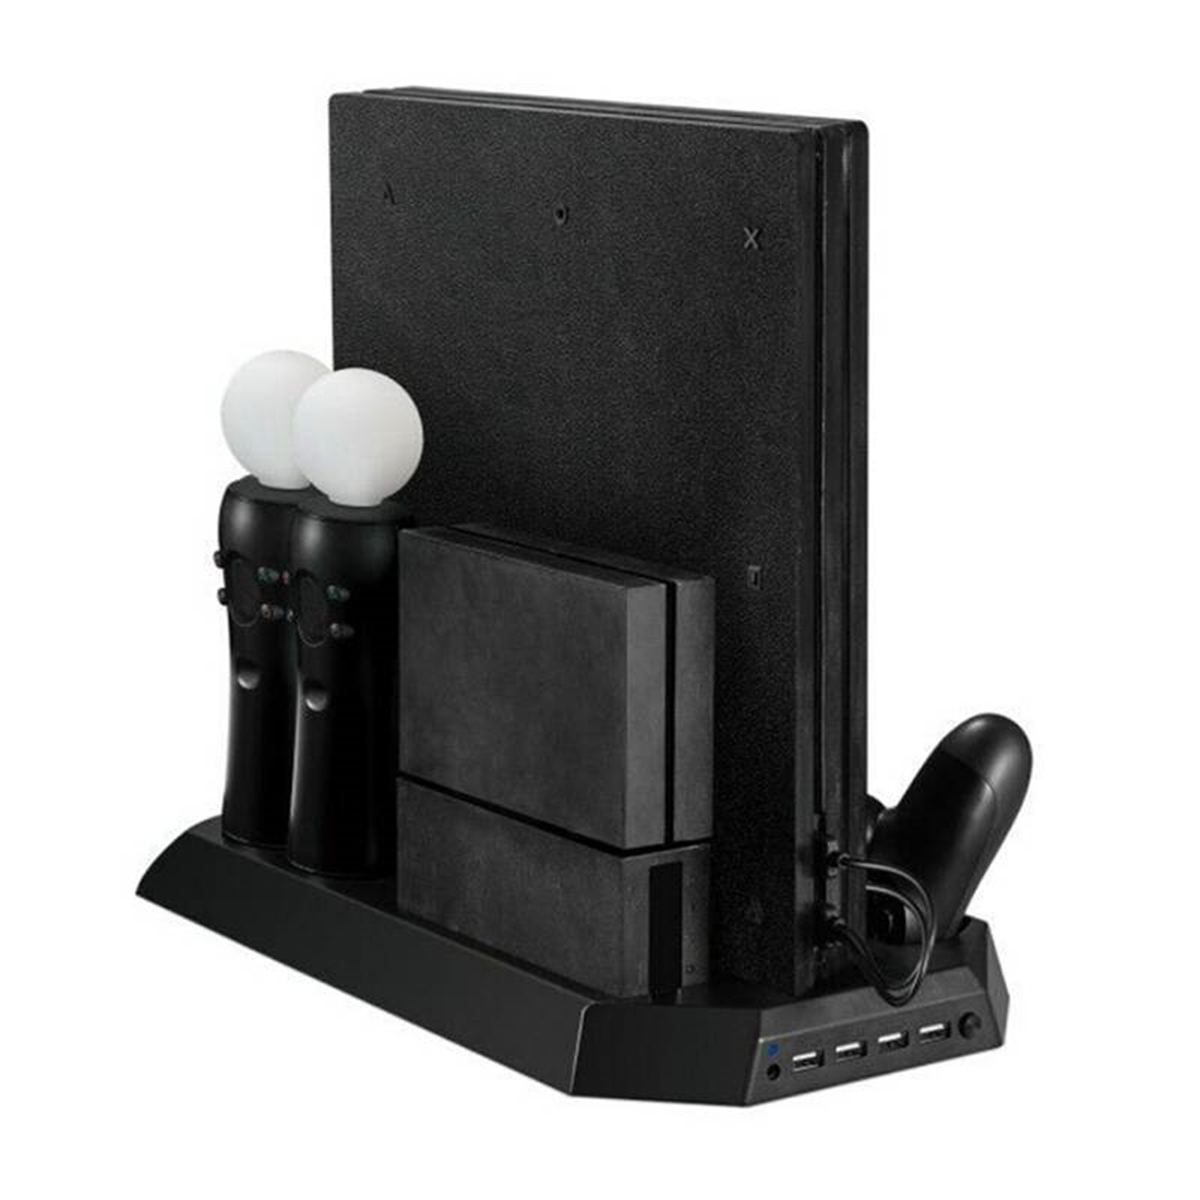 

Dual Cooling Station Vertical Stand with Gamepad Charging Dock for Playstation 4 PS4 VR PS4 Pro